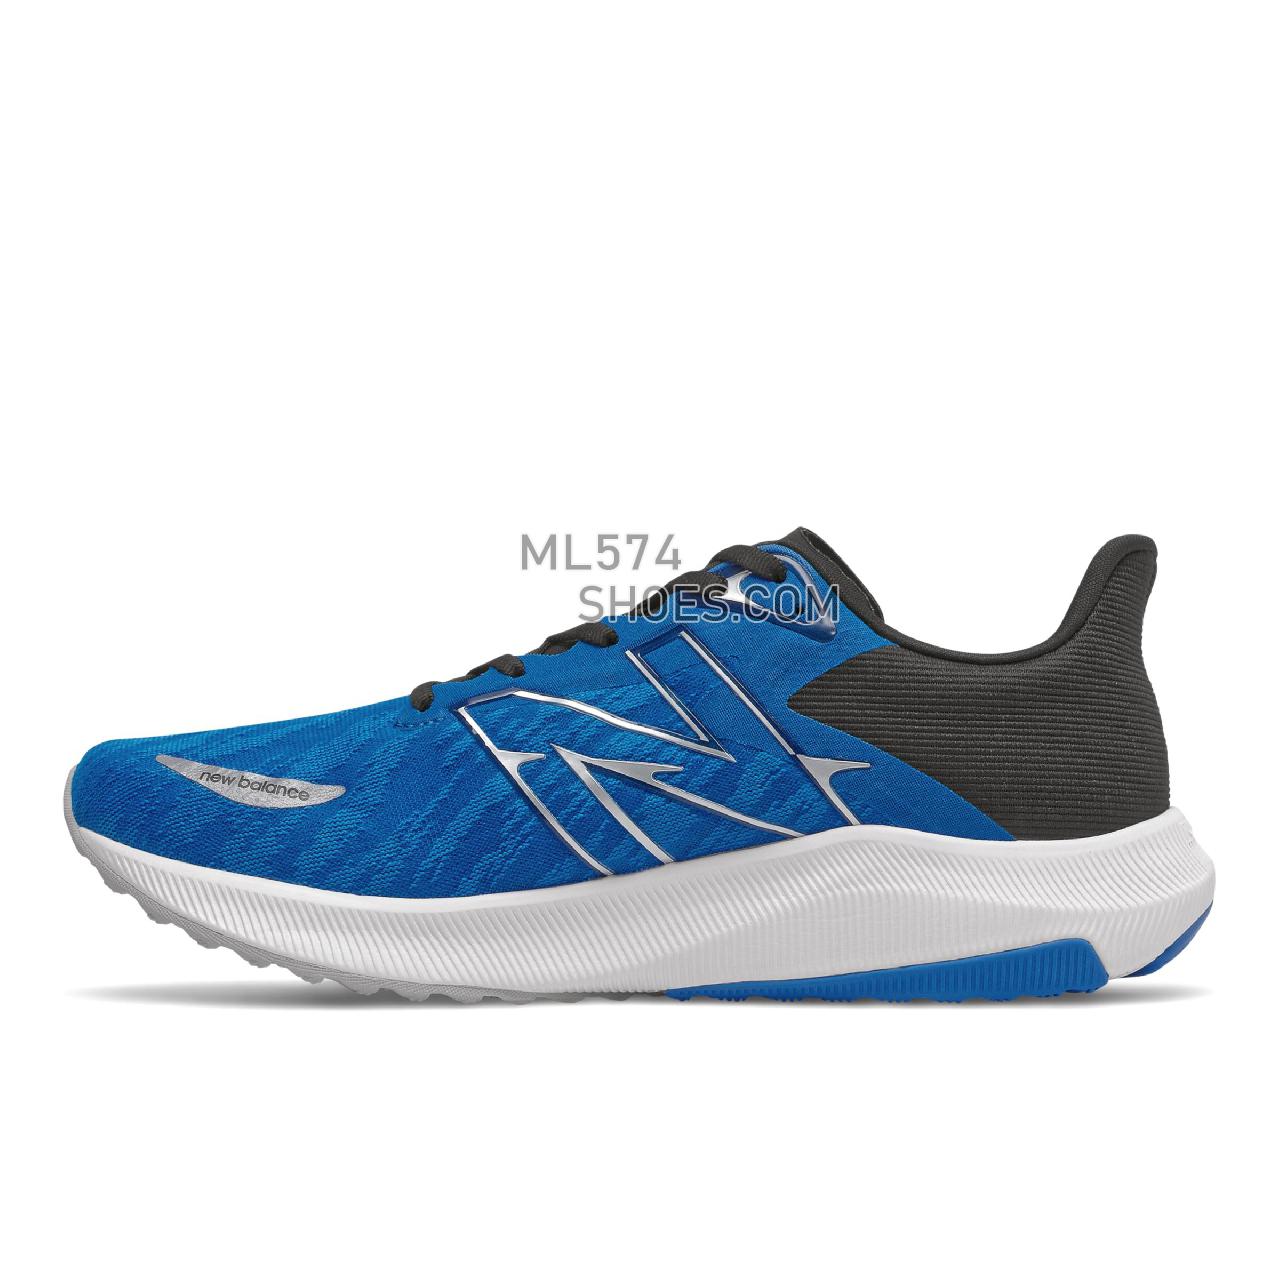 New Balance FuelCell Propel v3 - Men's Neutral Running - Laser Blue with Black - MFCPRLB3